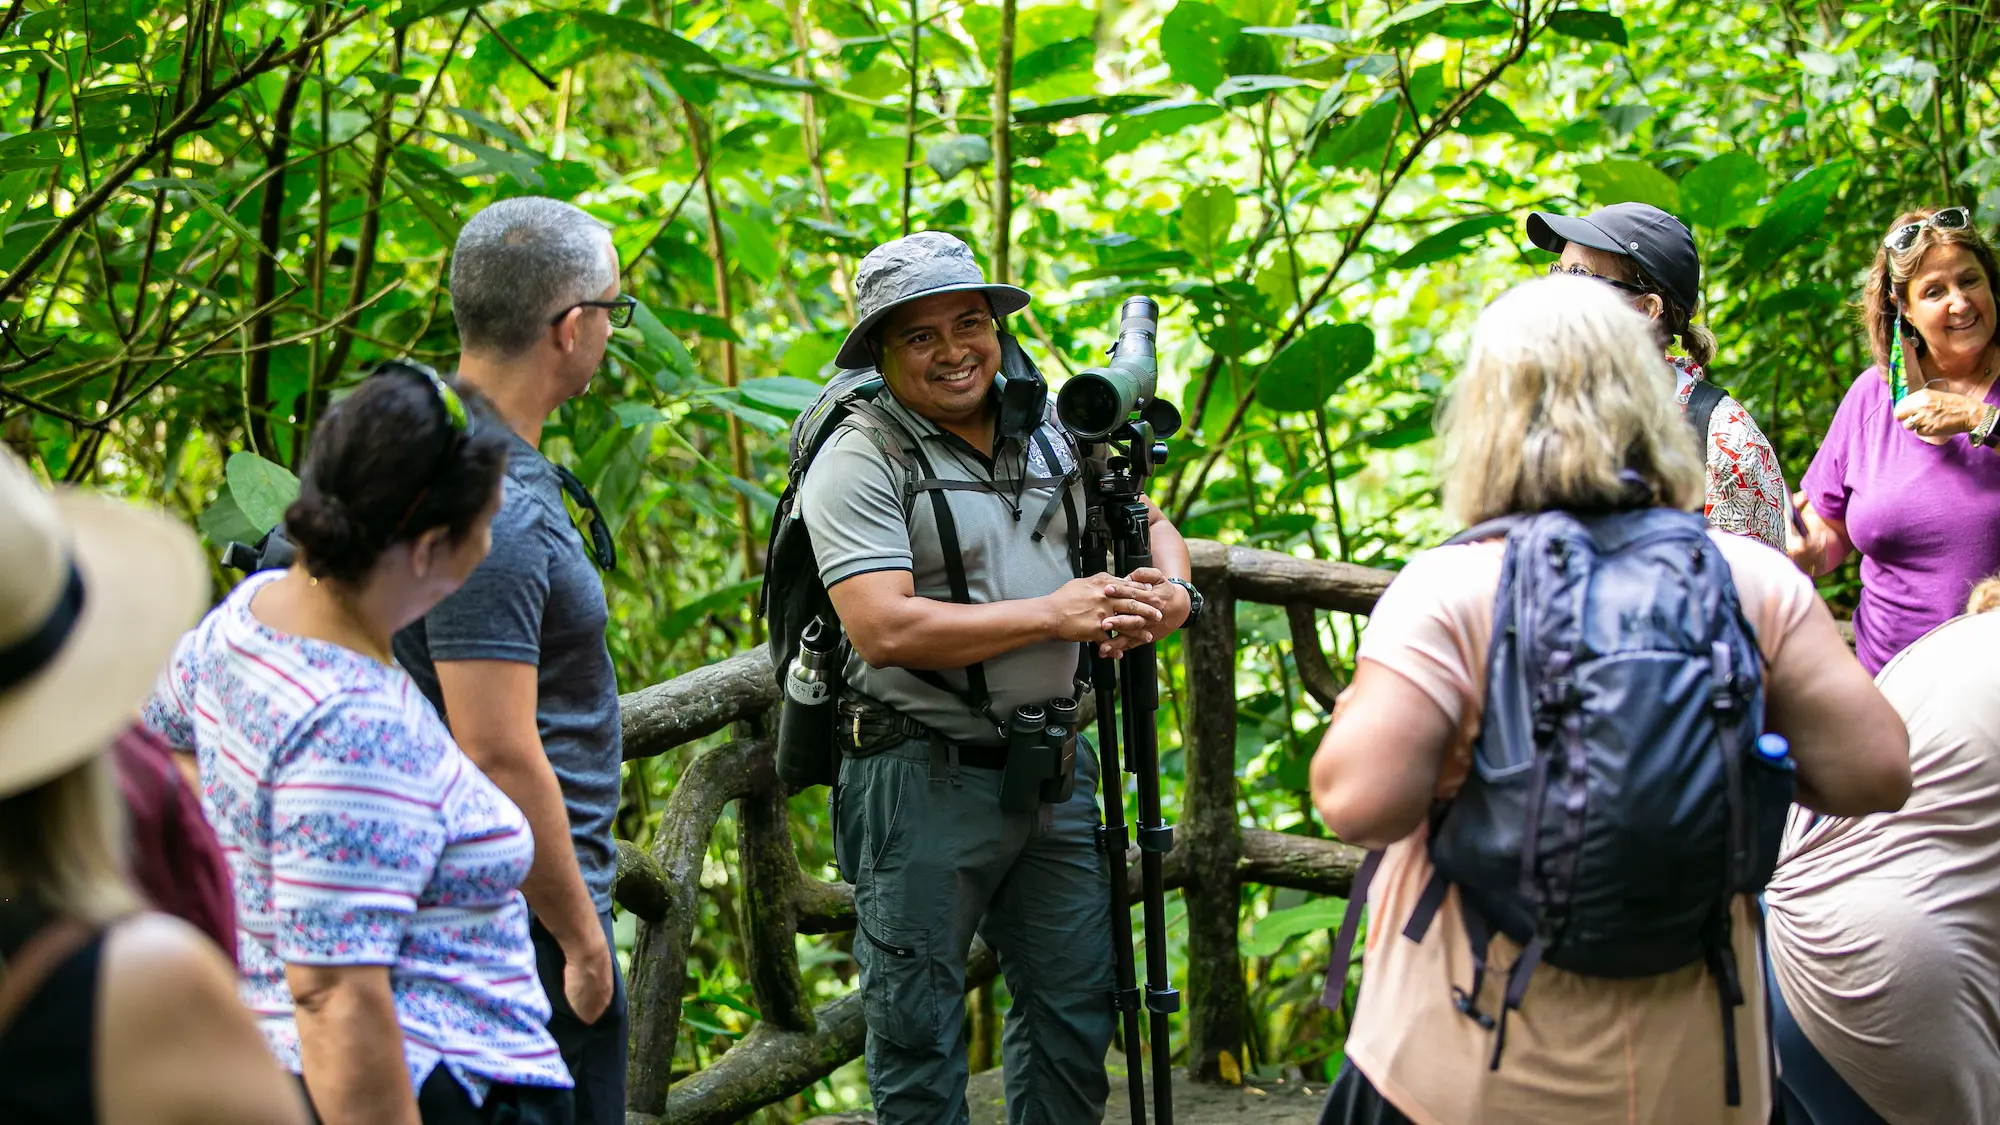 Travel guide leading a group through the jungle.